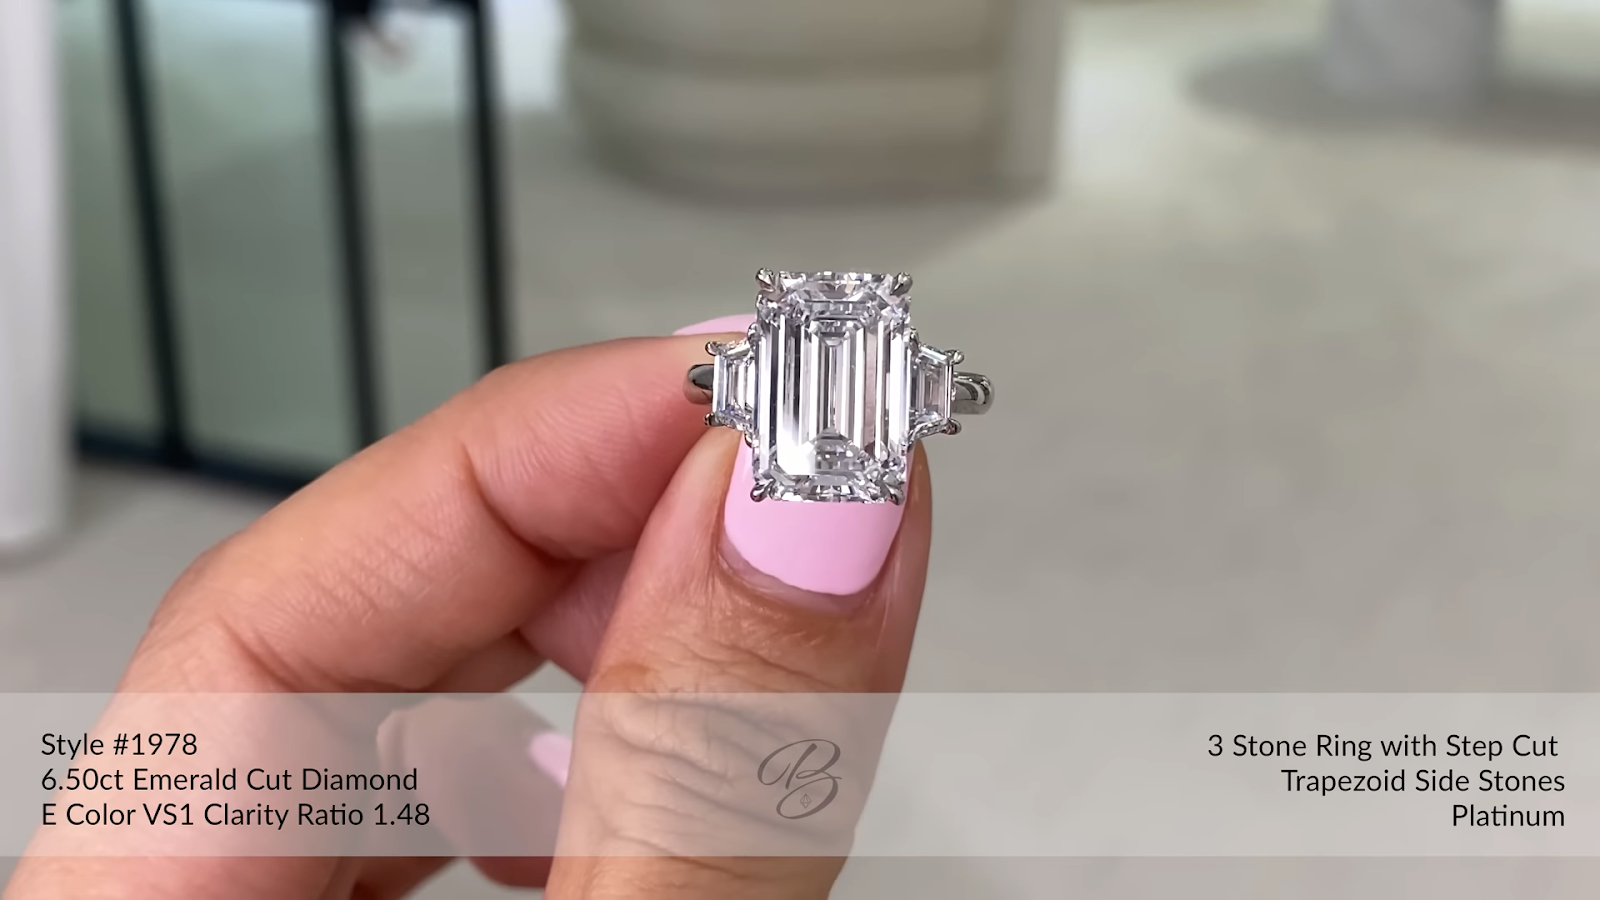 6.50ct Emerald Cut Diamond with Step Cut Trapezoid Side Stones